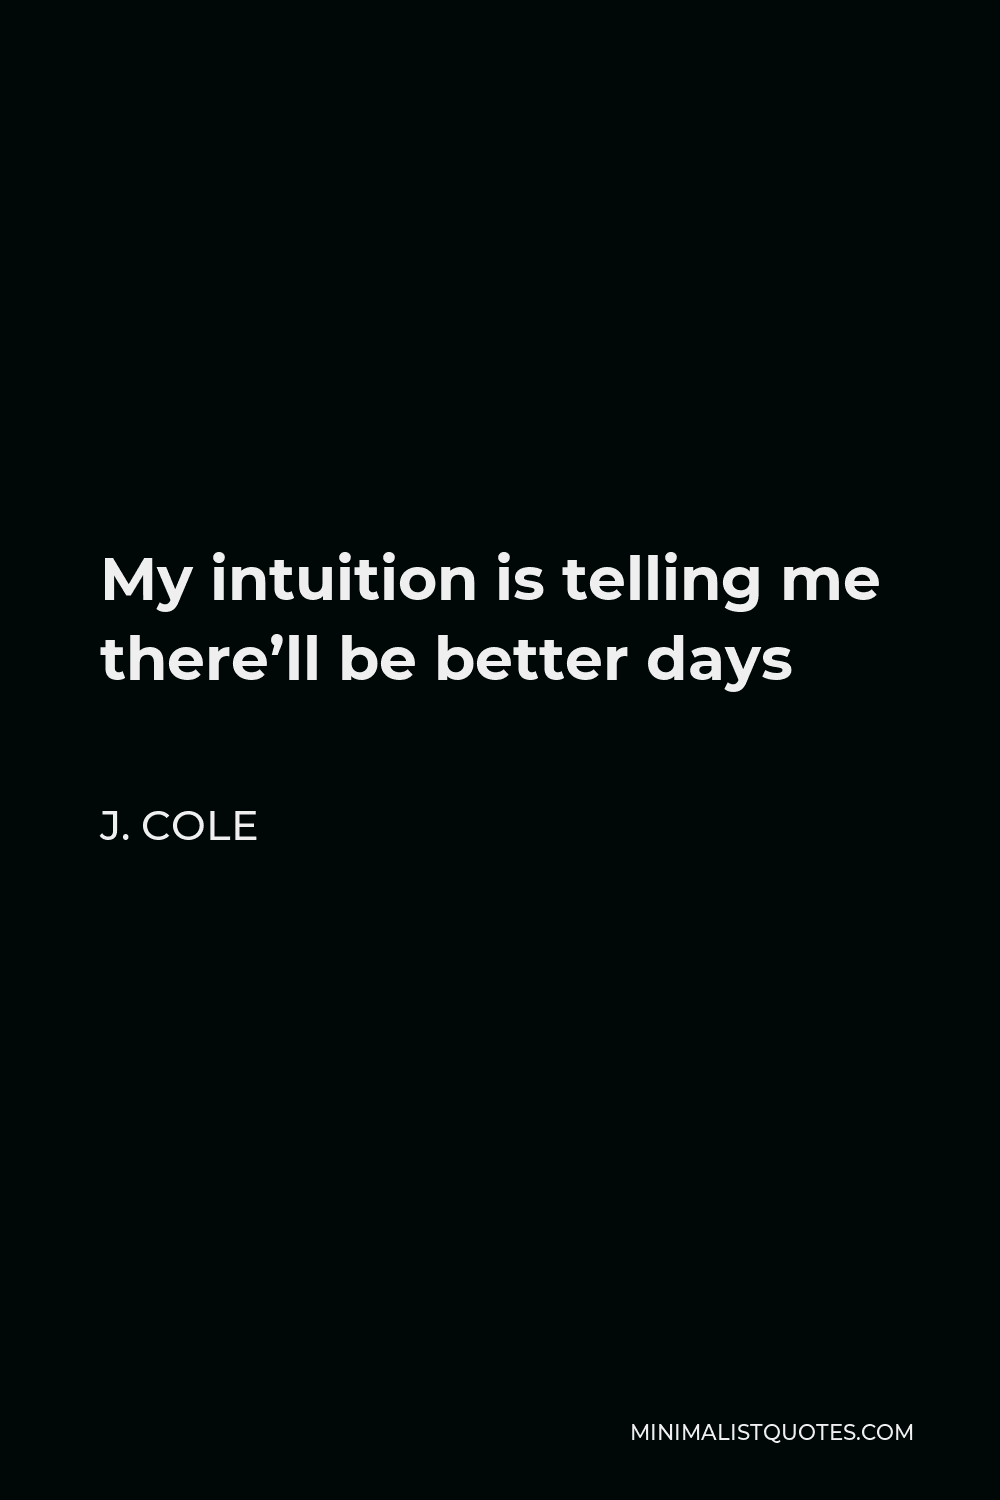 J. Cole Quote - My intuition is telling me there’ll be better days